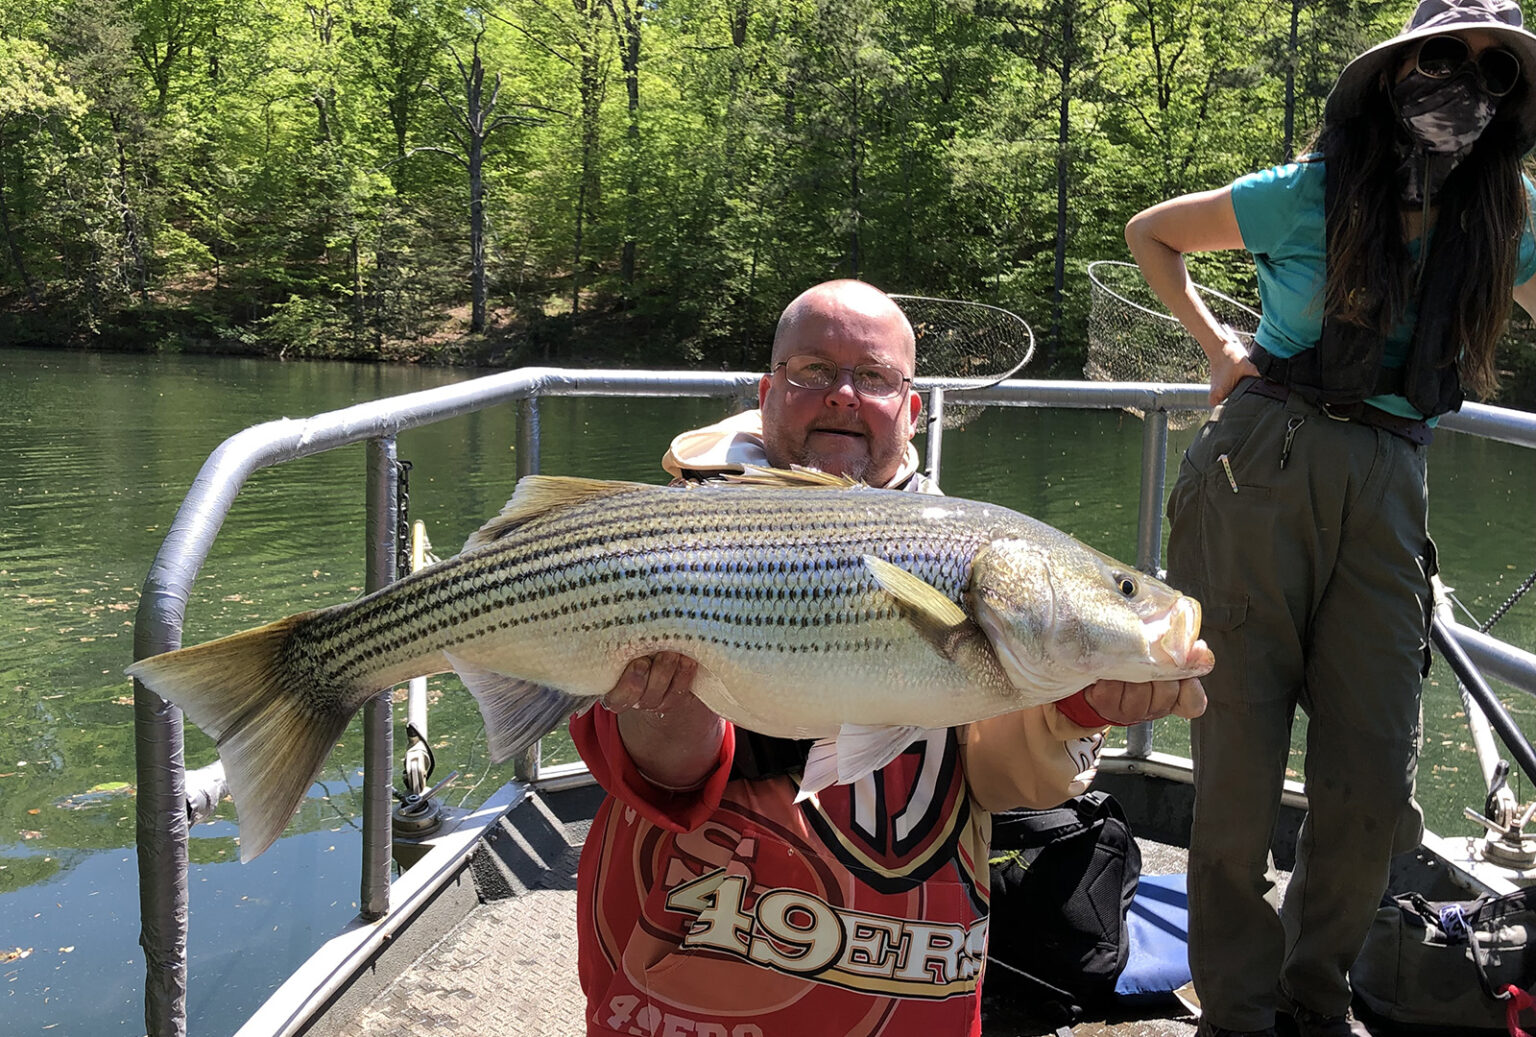 A Look Behind the Scenes of Striped Bass Management in Virginia’s Lakes